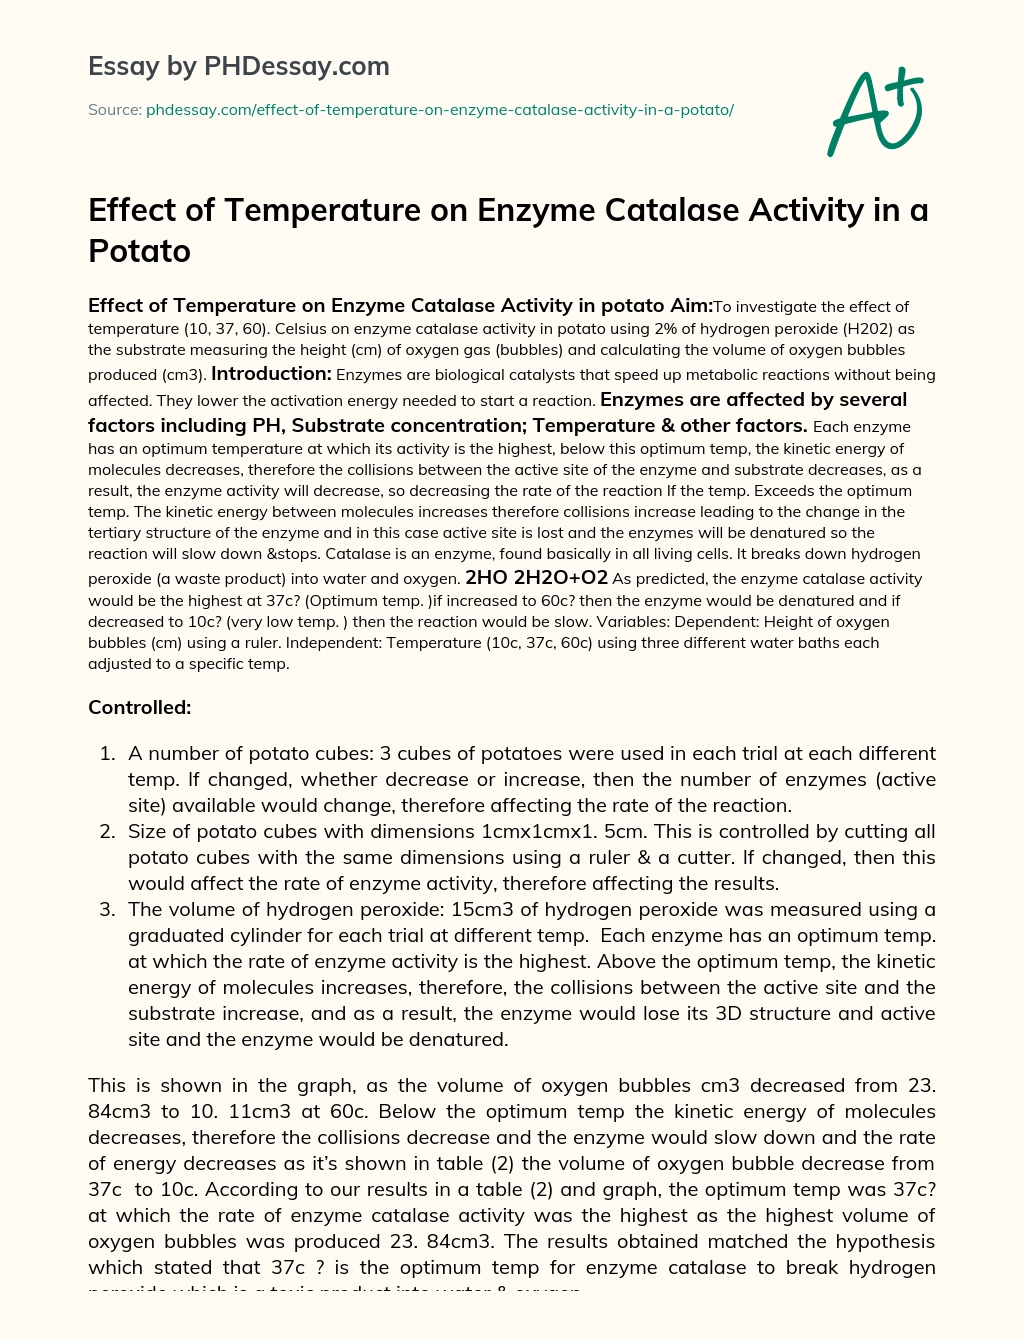 Effect of Temperature on Enzyme Catalase Activity in a Potato essay